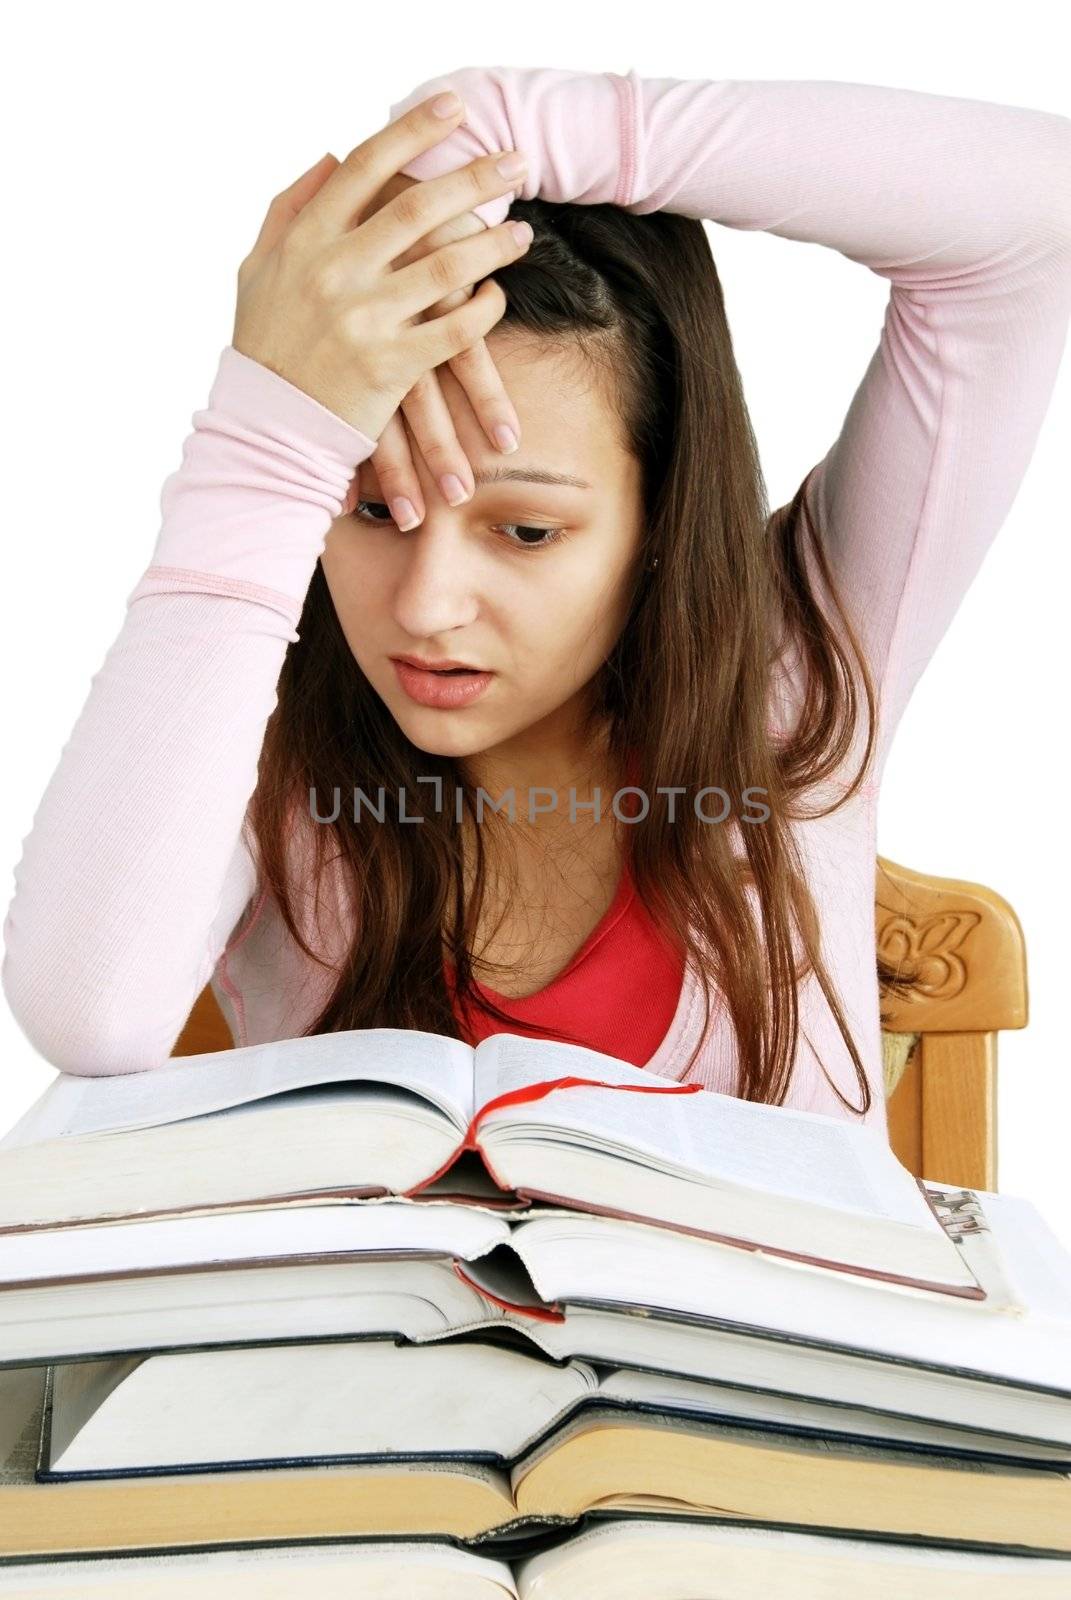 teenage girl portrait with arm holding head, learning